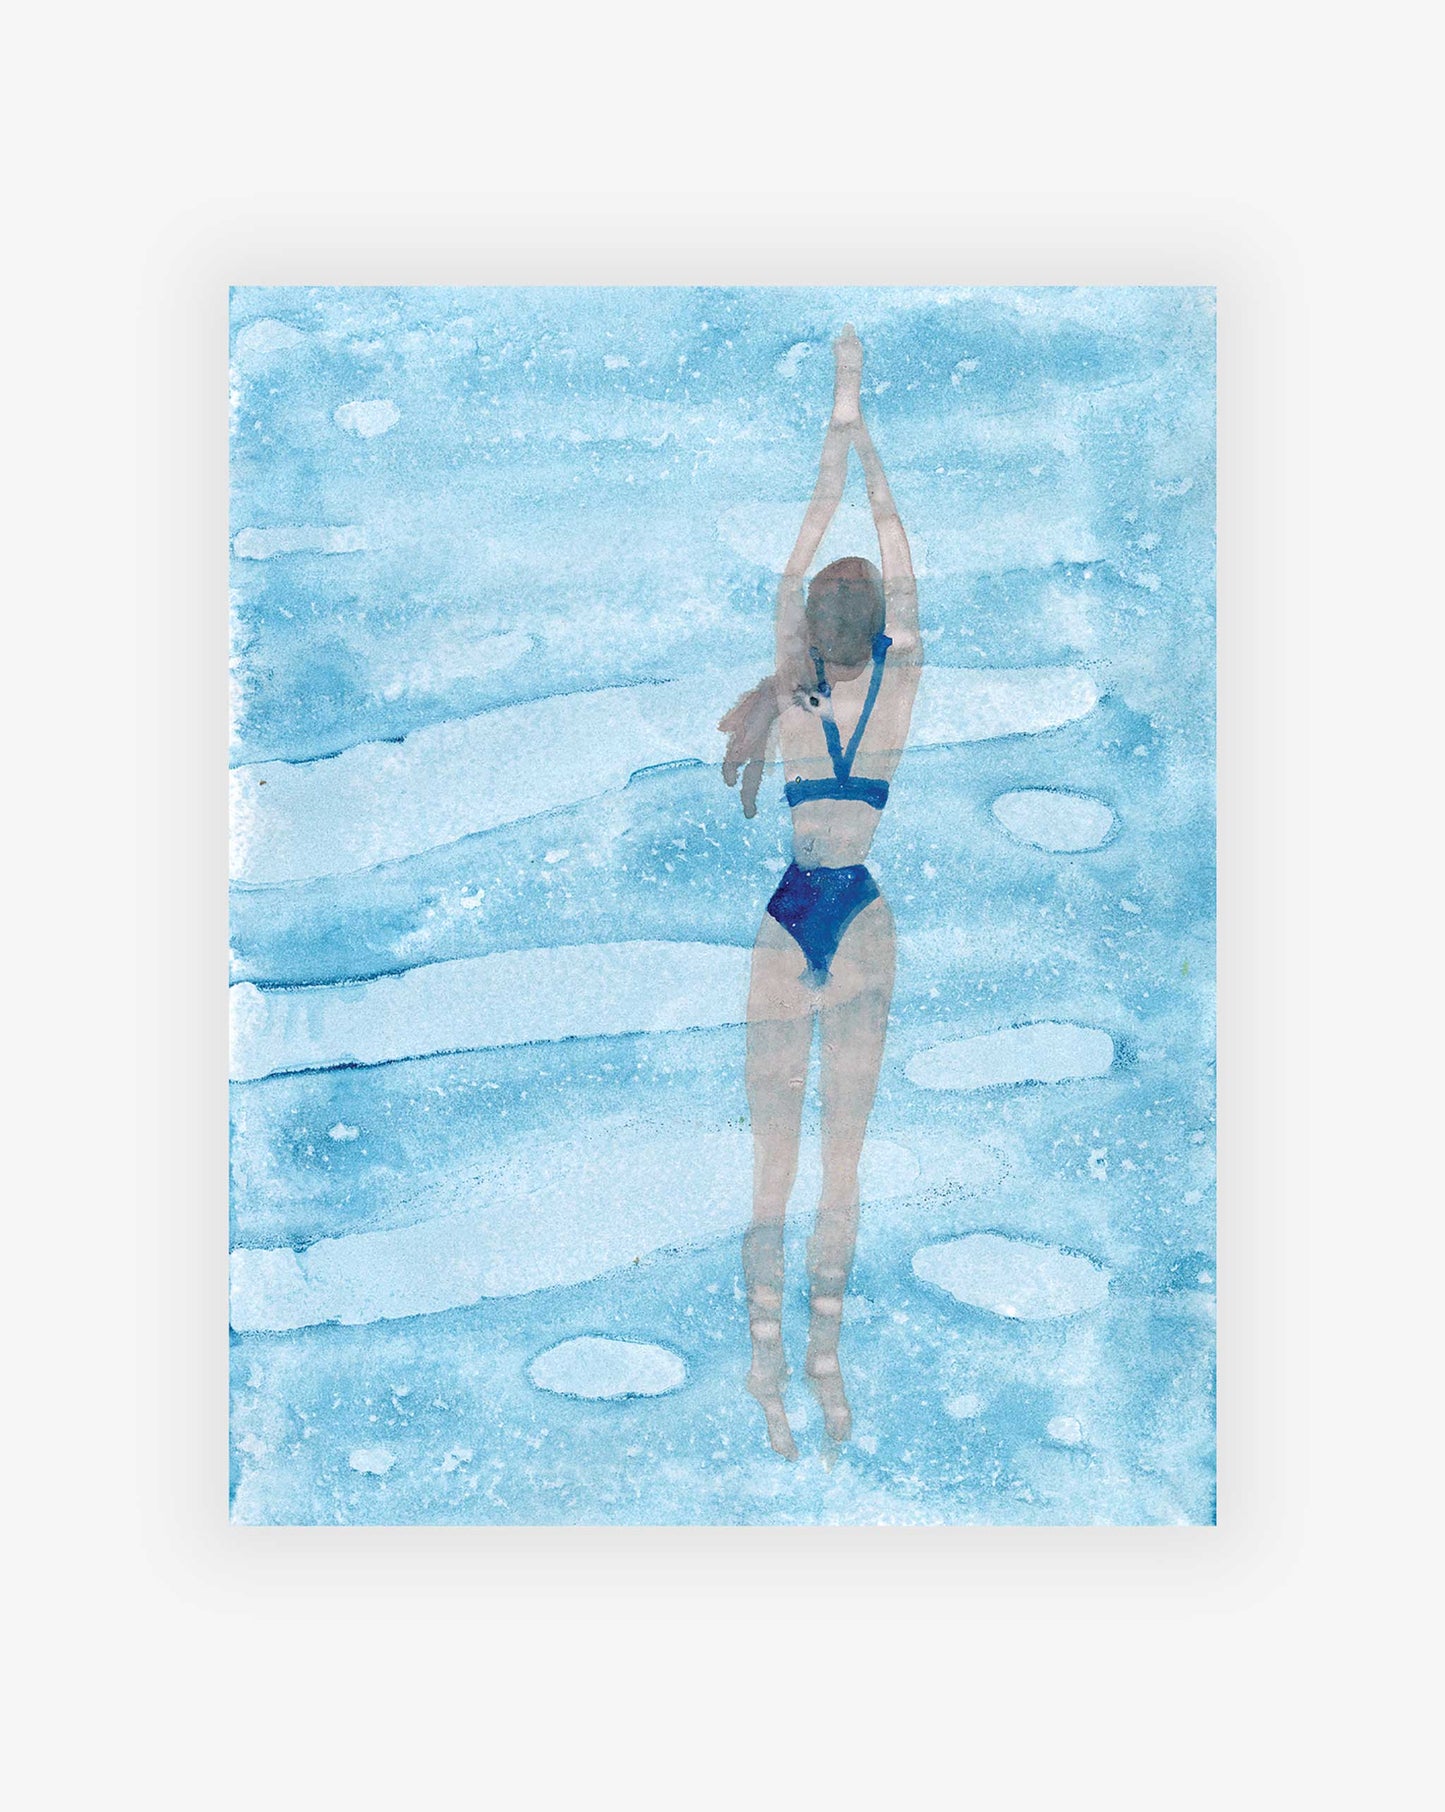 A Dive Print depicts a female swimmer in a blue swimsuit, seen from above, gracefully moving through rippling blue water.